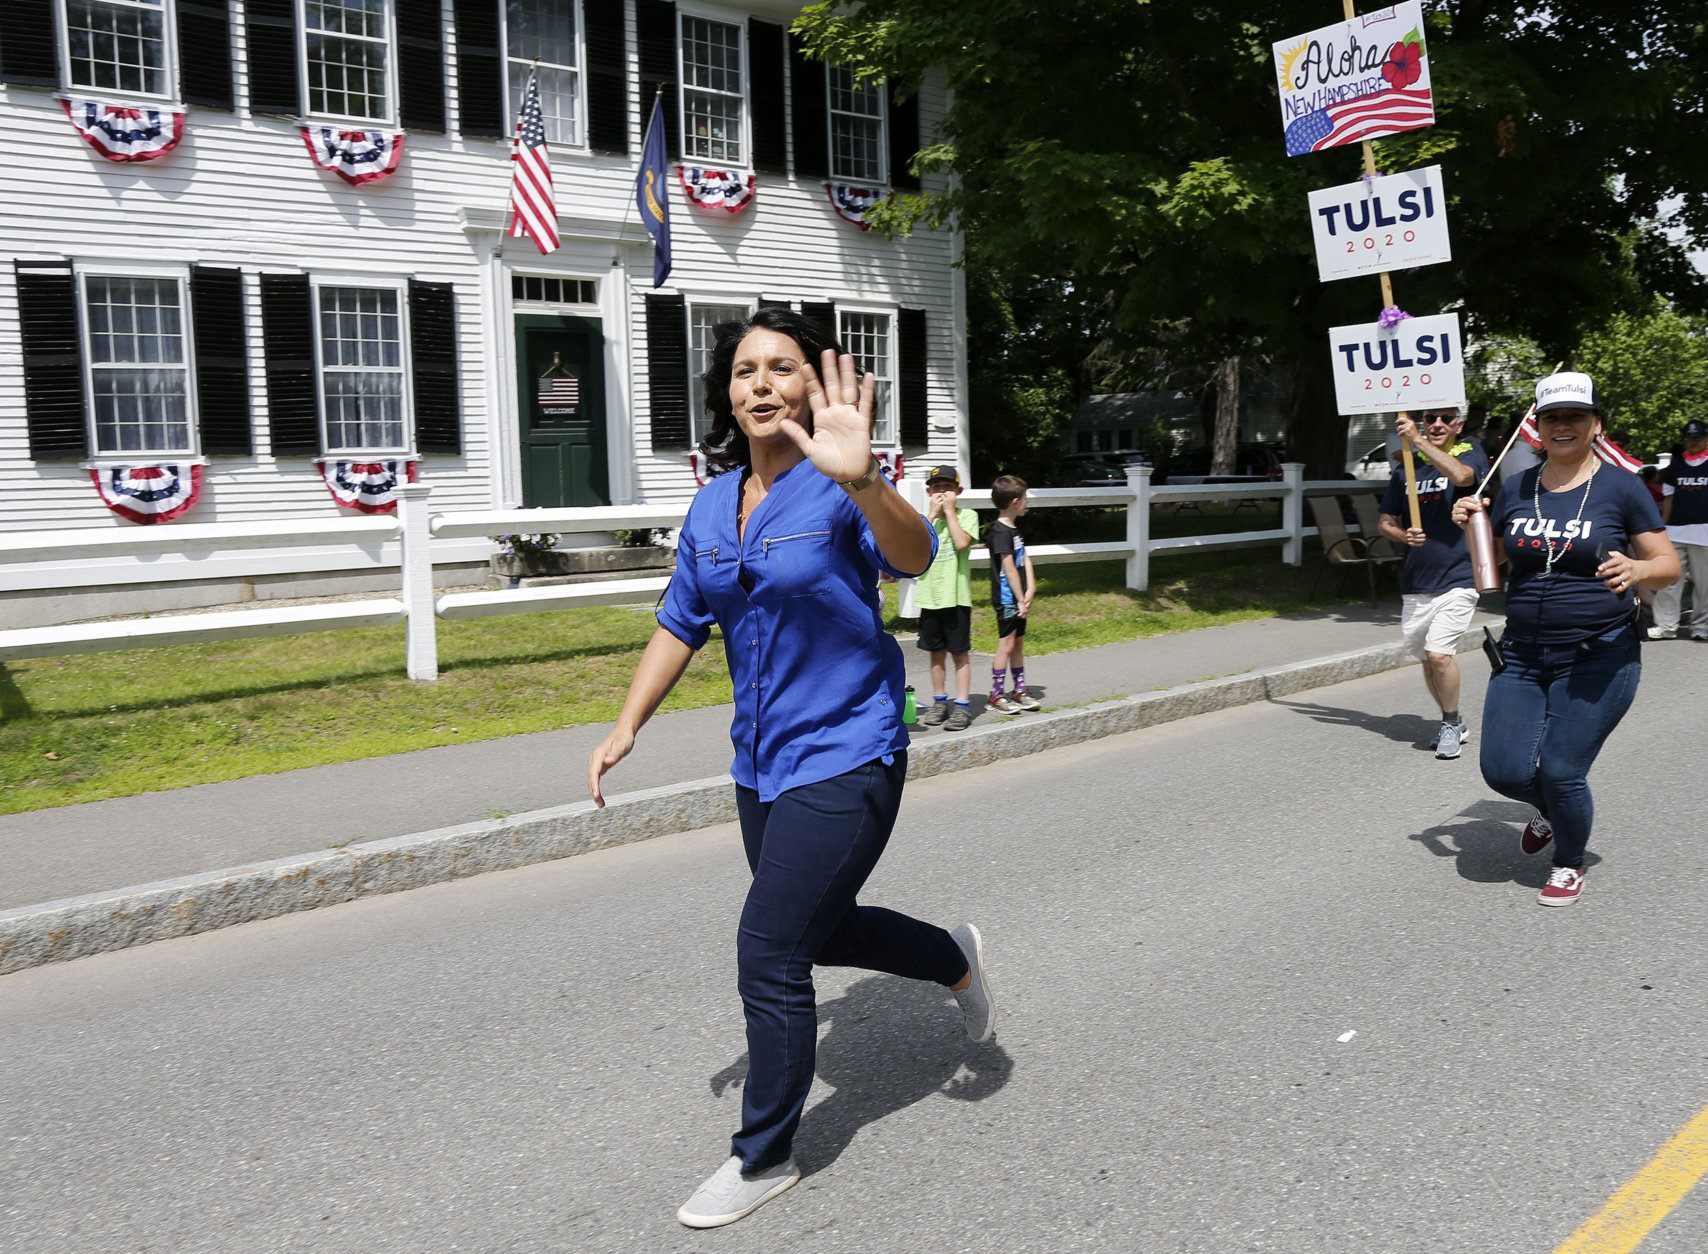 Democratic presidential candidate U.S. Rep. Tulsi Gabbard, D-Hawaii, waves along the parade route as she runs to catch up to her supporters during the Fourth of July Parade, Thursday, July 4, 2019, in Amherst. (AP Photo/Mary Schwalm)